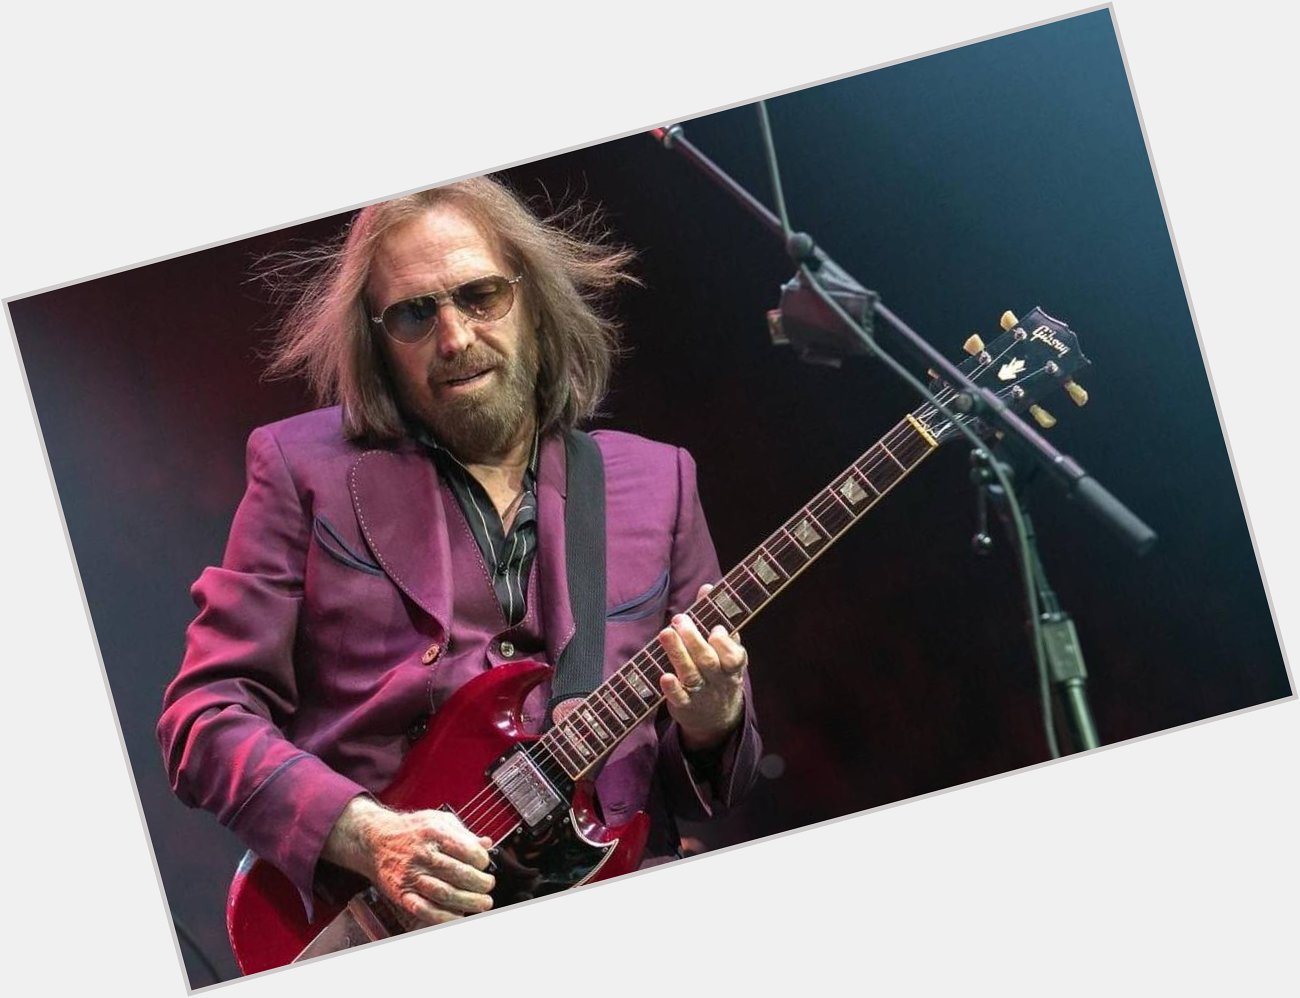 Happy birthday to the late great Tom Petty. Still get chills when I hear his music on the radio. to the legend. 